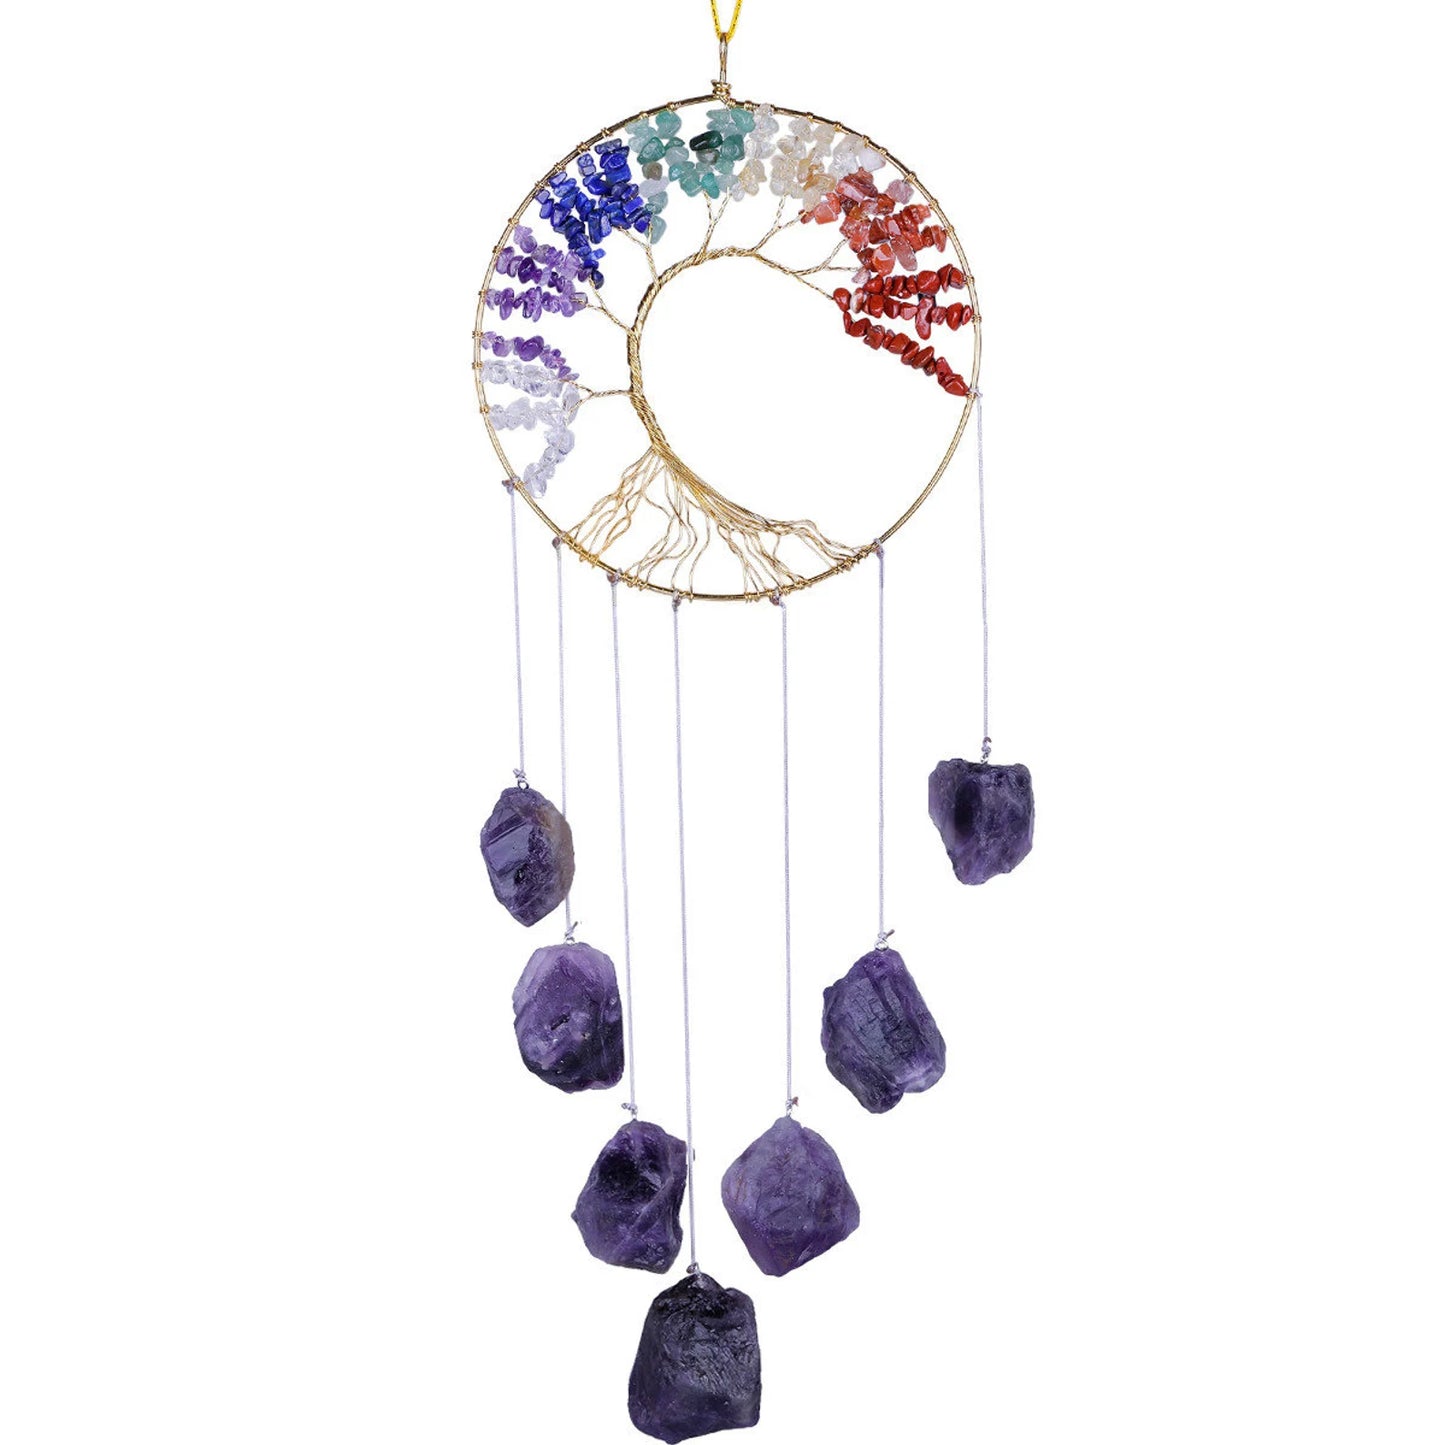 Unique Crystal Wind Chime for Indoor/ Outdoor Decoration- 7 Chakra Crystal Tree- Healing Crystal- Tree of Life